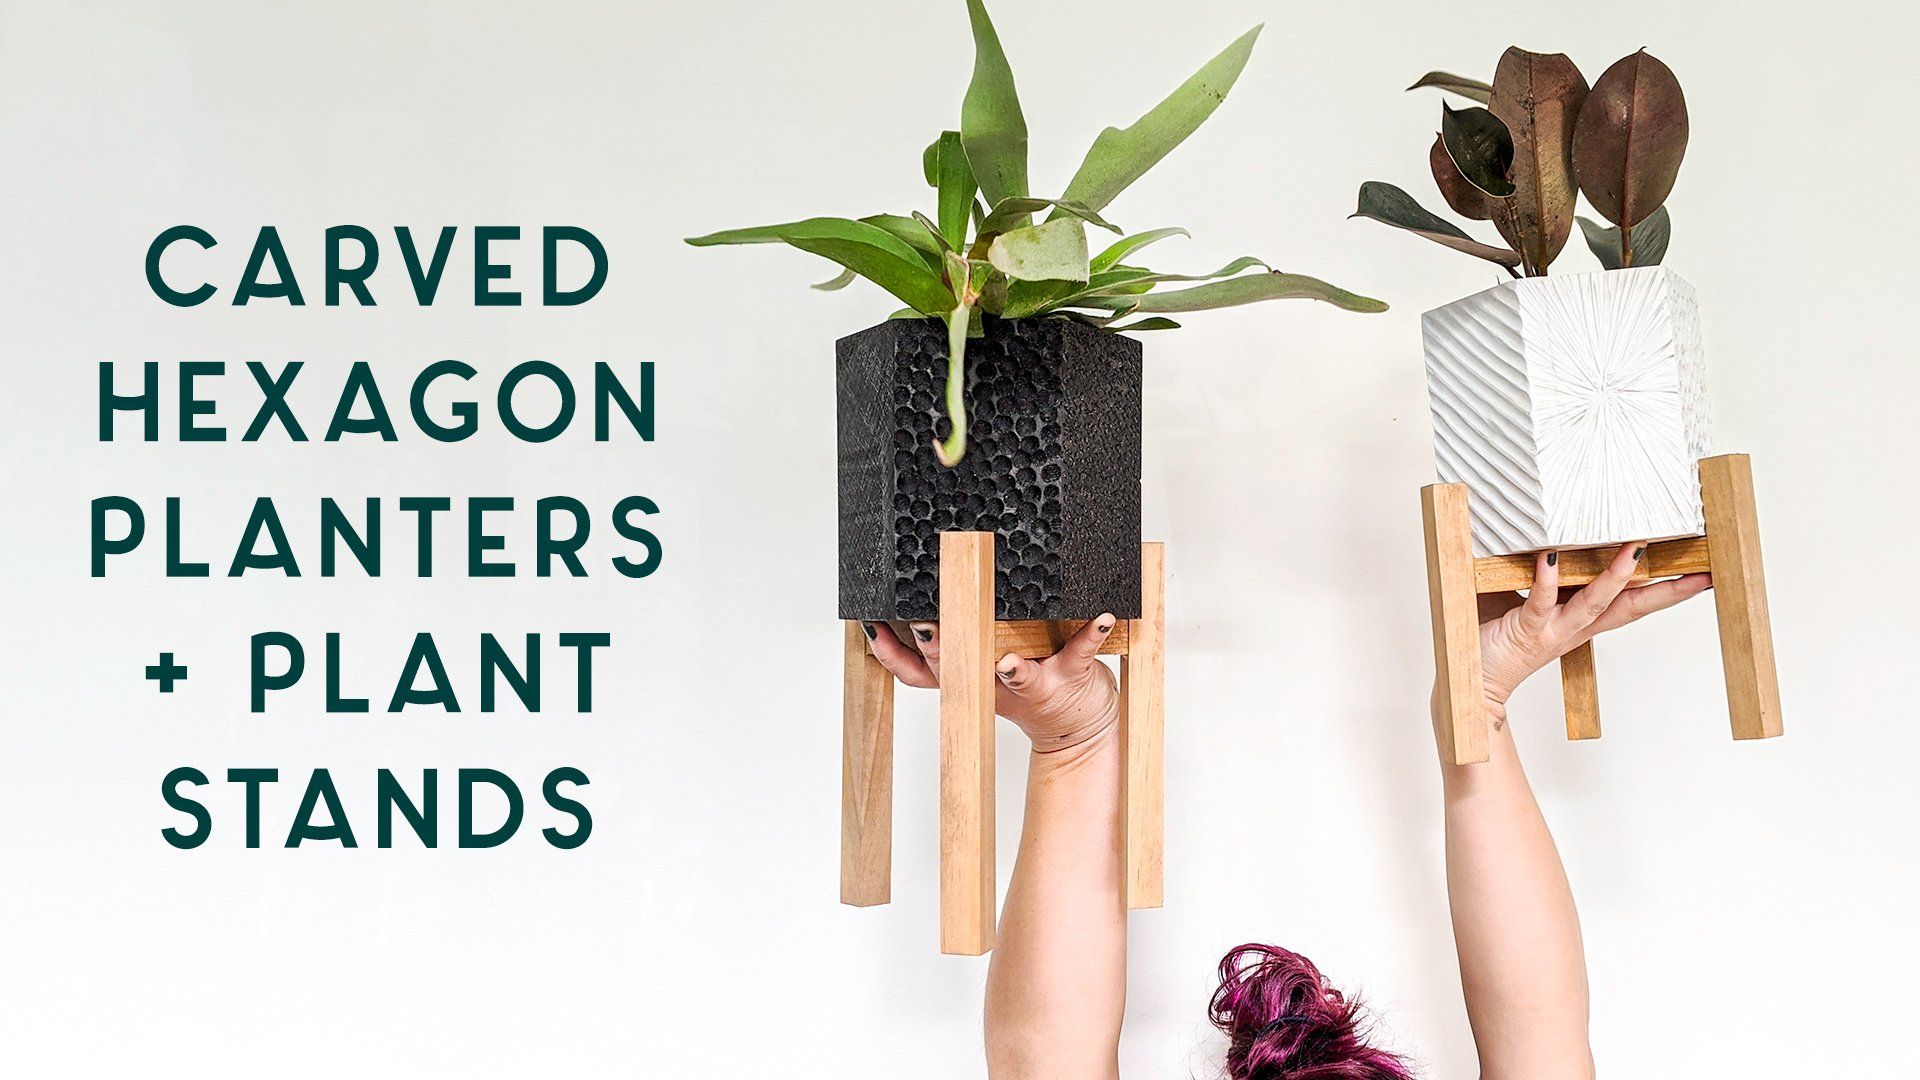 Diy Carved Hexagon Planter With Plant Stand • Ugly Duckling House With Regard To Hexagon Plant Stands (View 13 of 15)